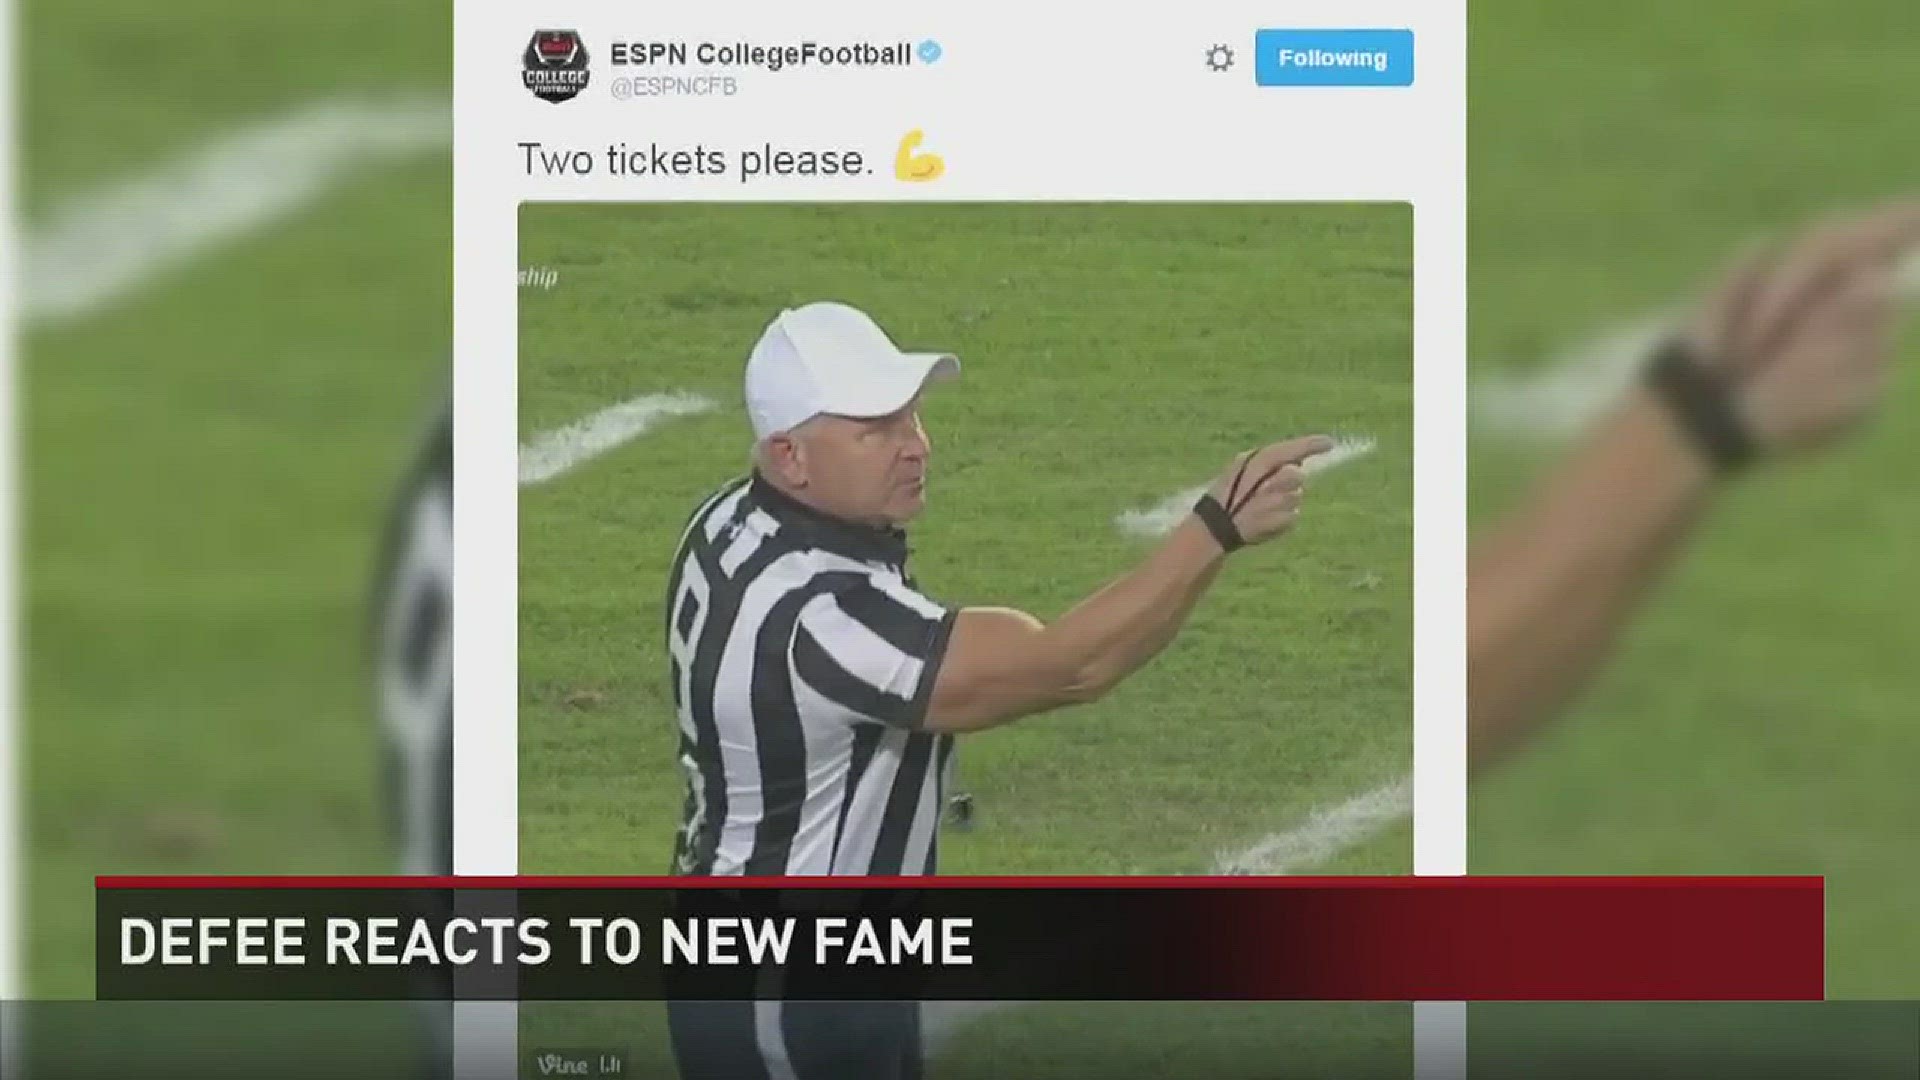 Mike Defee has been officiating football games since 1995. But Monday night he was able to be the head referee in the pinnacle of college football games, the national championship.